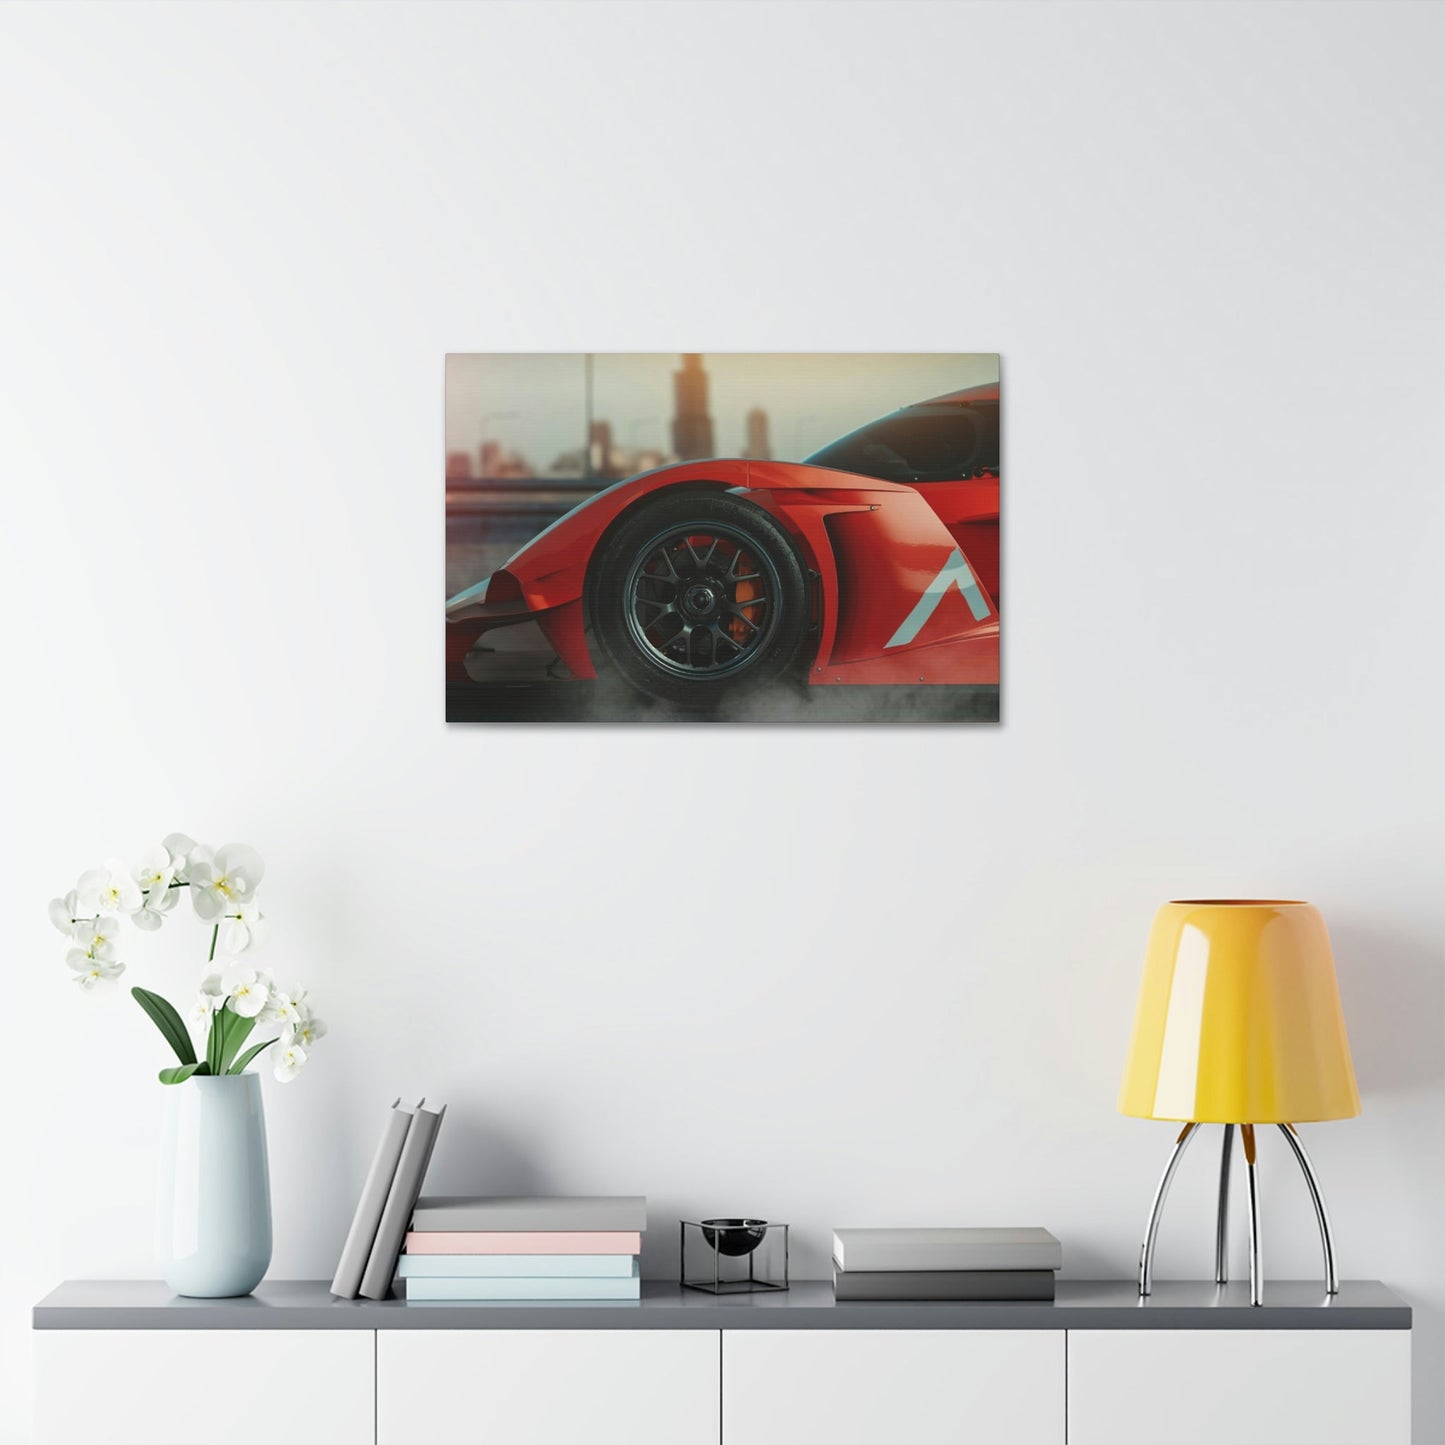 The Need for Speed: Canvas & Posters Art of Auto Racing